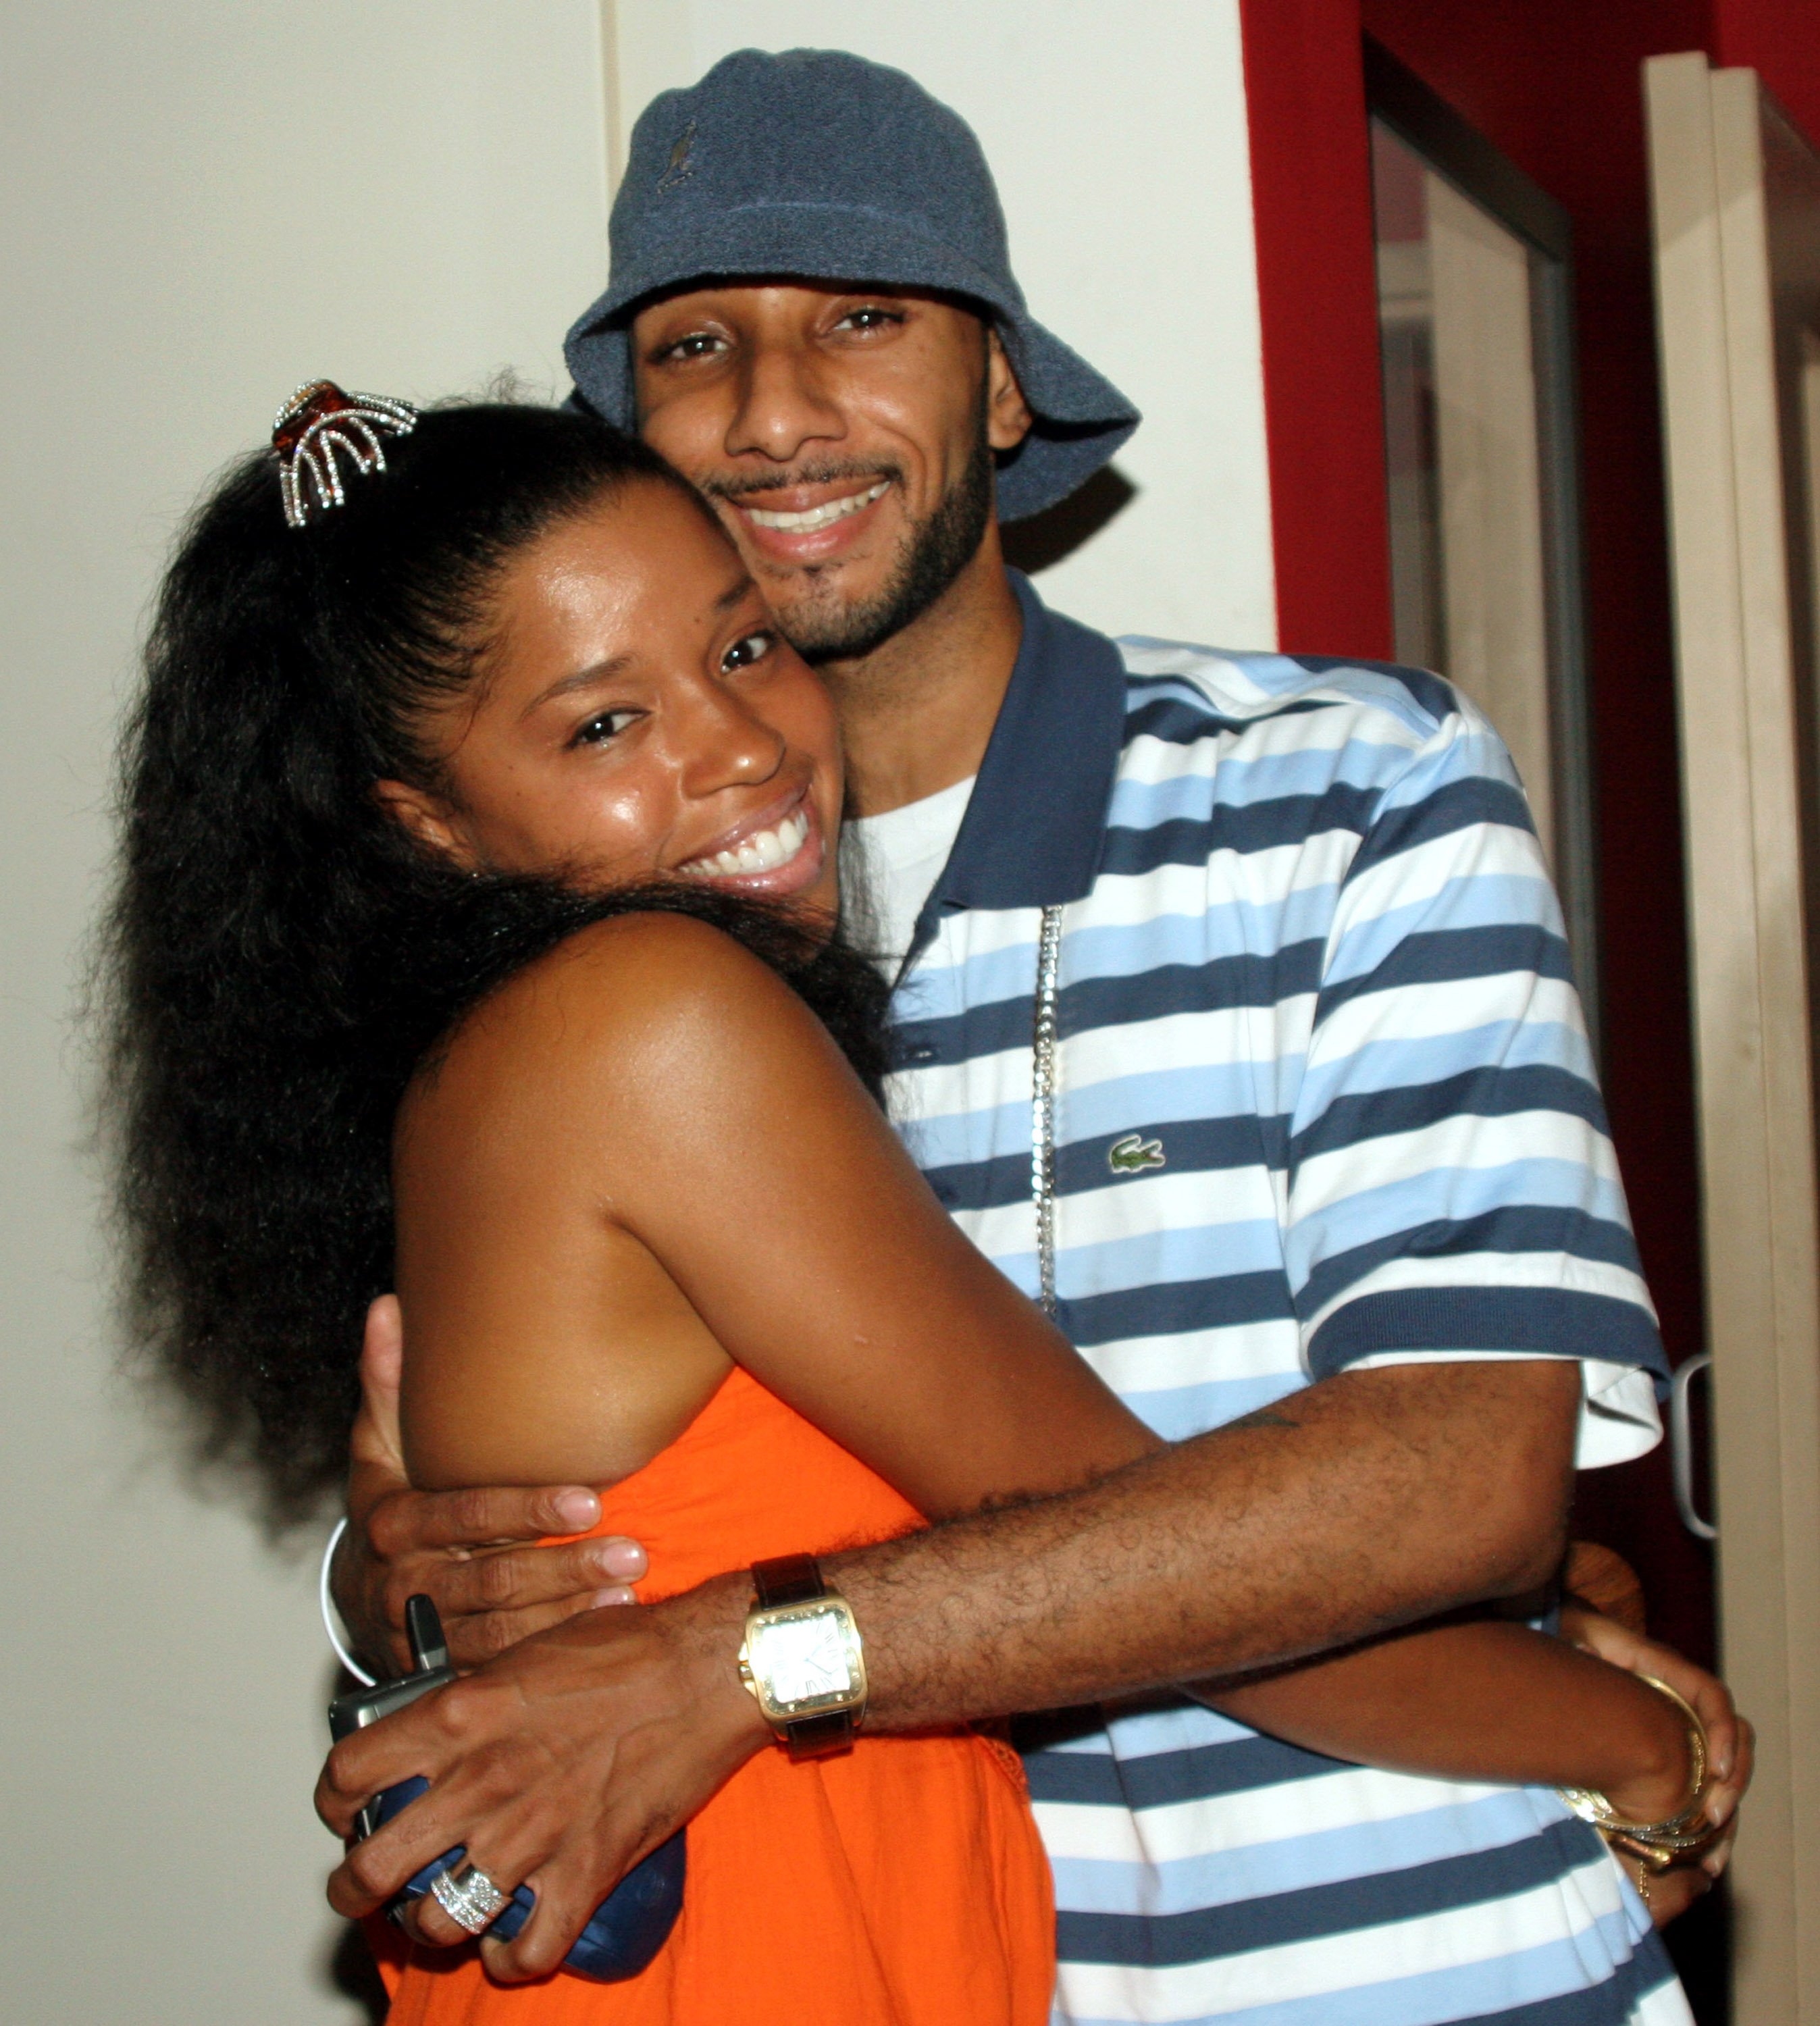 Mashonda and Swizz Beatz during Mashonda Listening Session for J Records - August 16, 2005 at Monza Studio in New York City, New York, | Photo: GettyImages